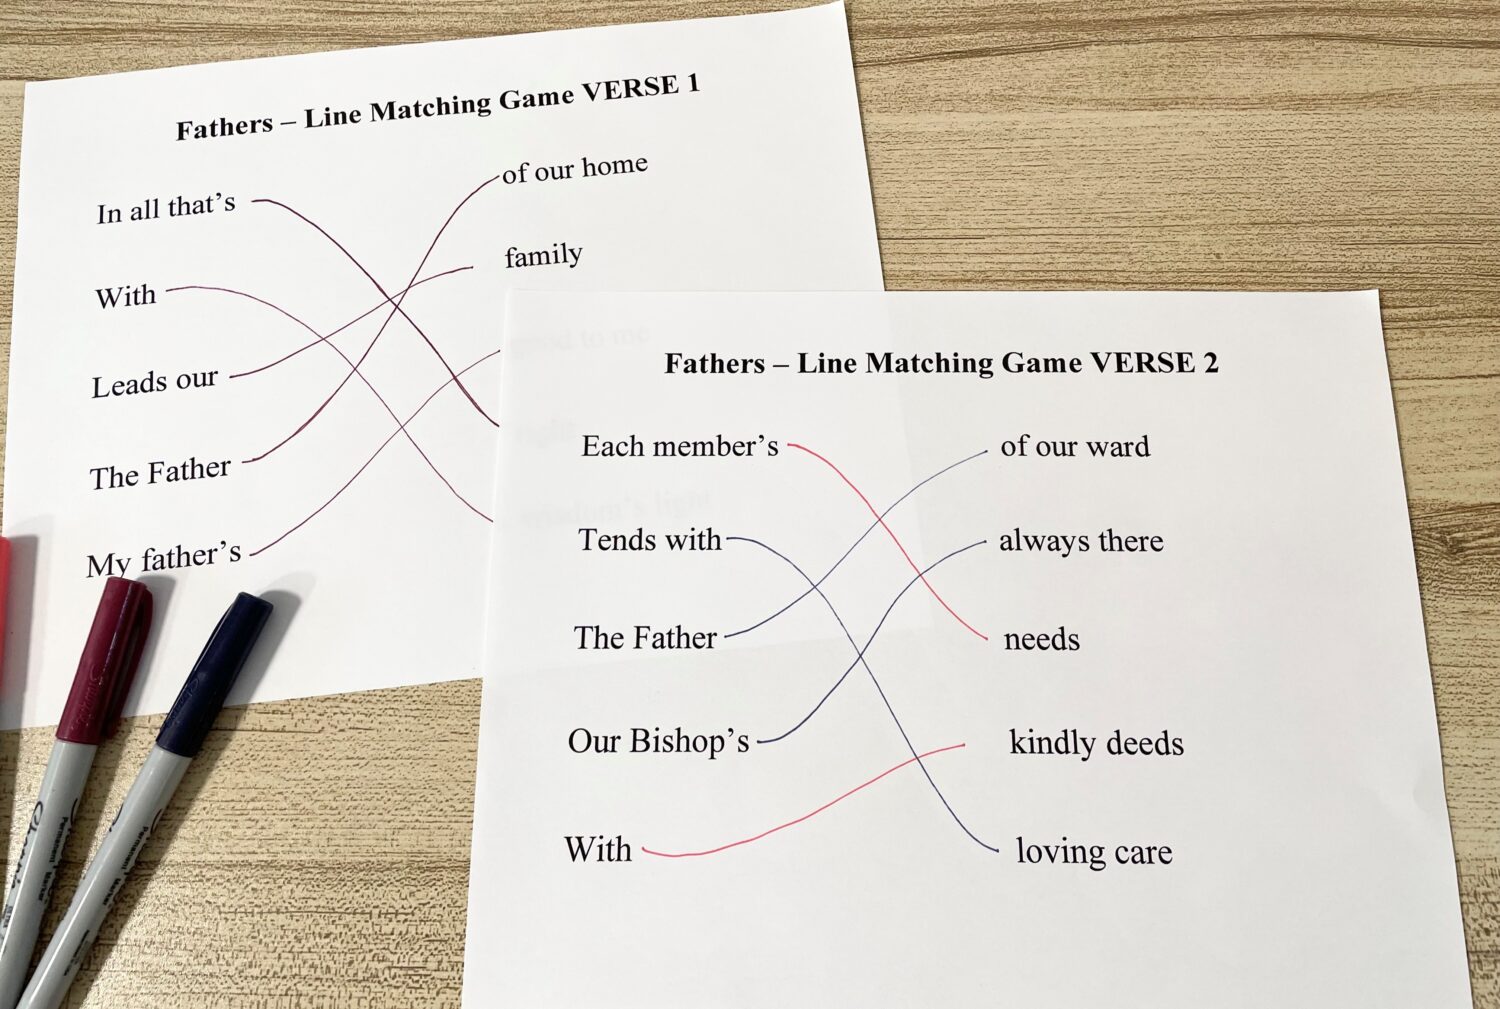 Fathers Line Matching Game Easy ideas for Music Leaders IMG 6609 e1654279811886